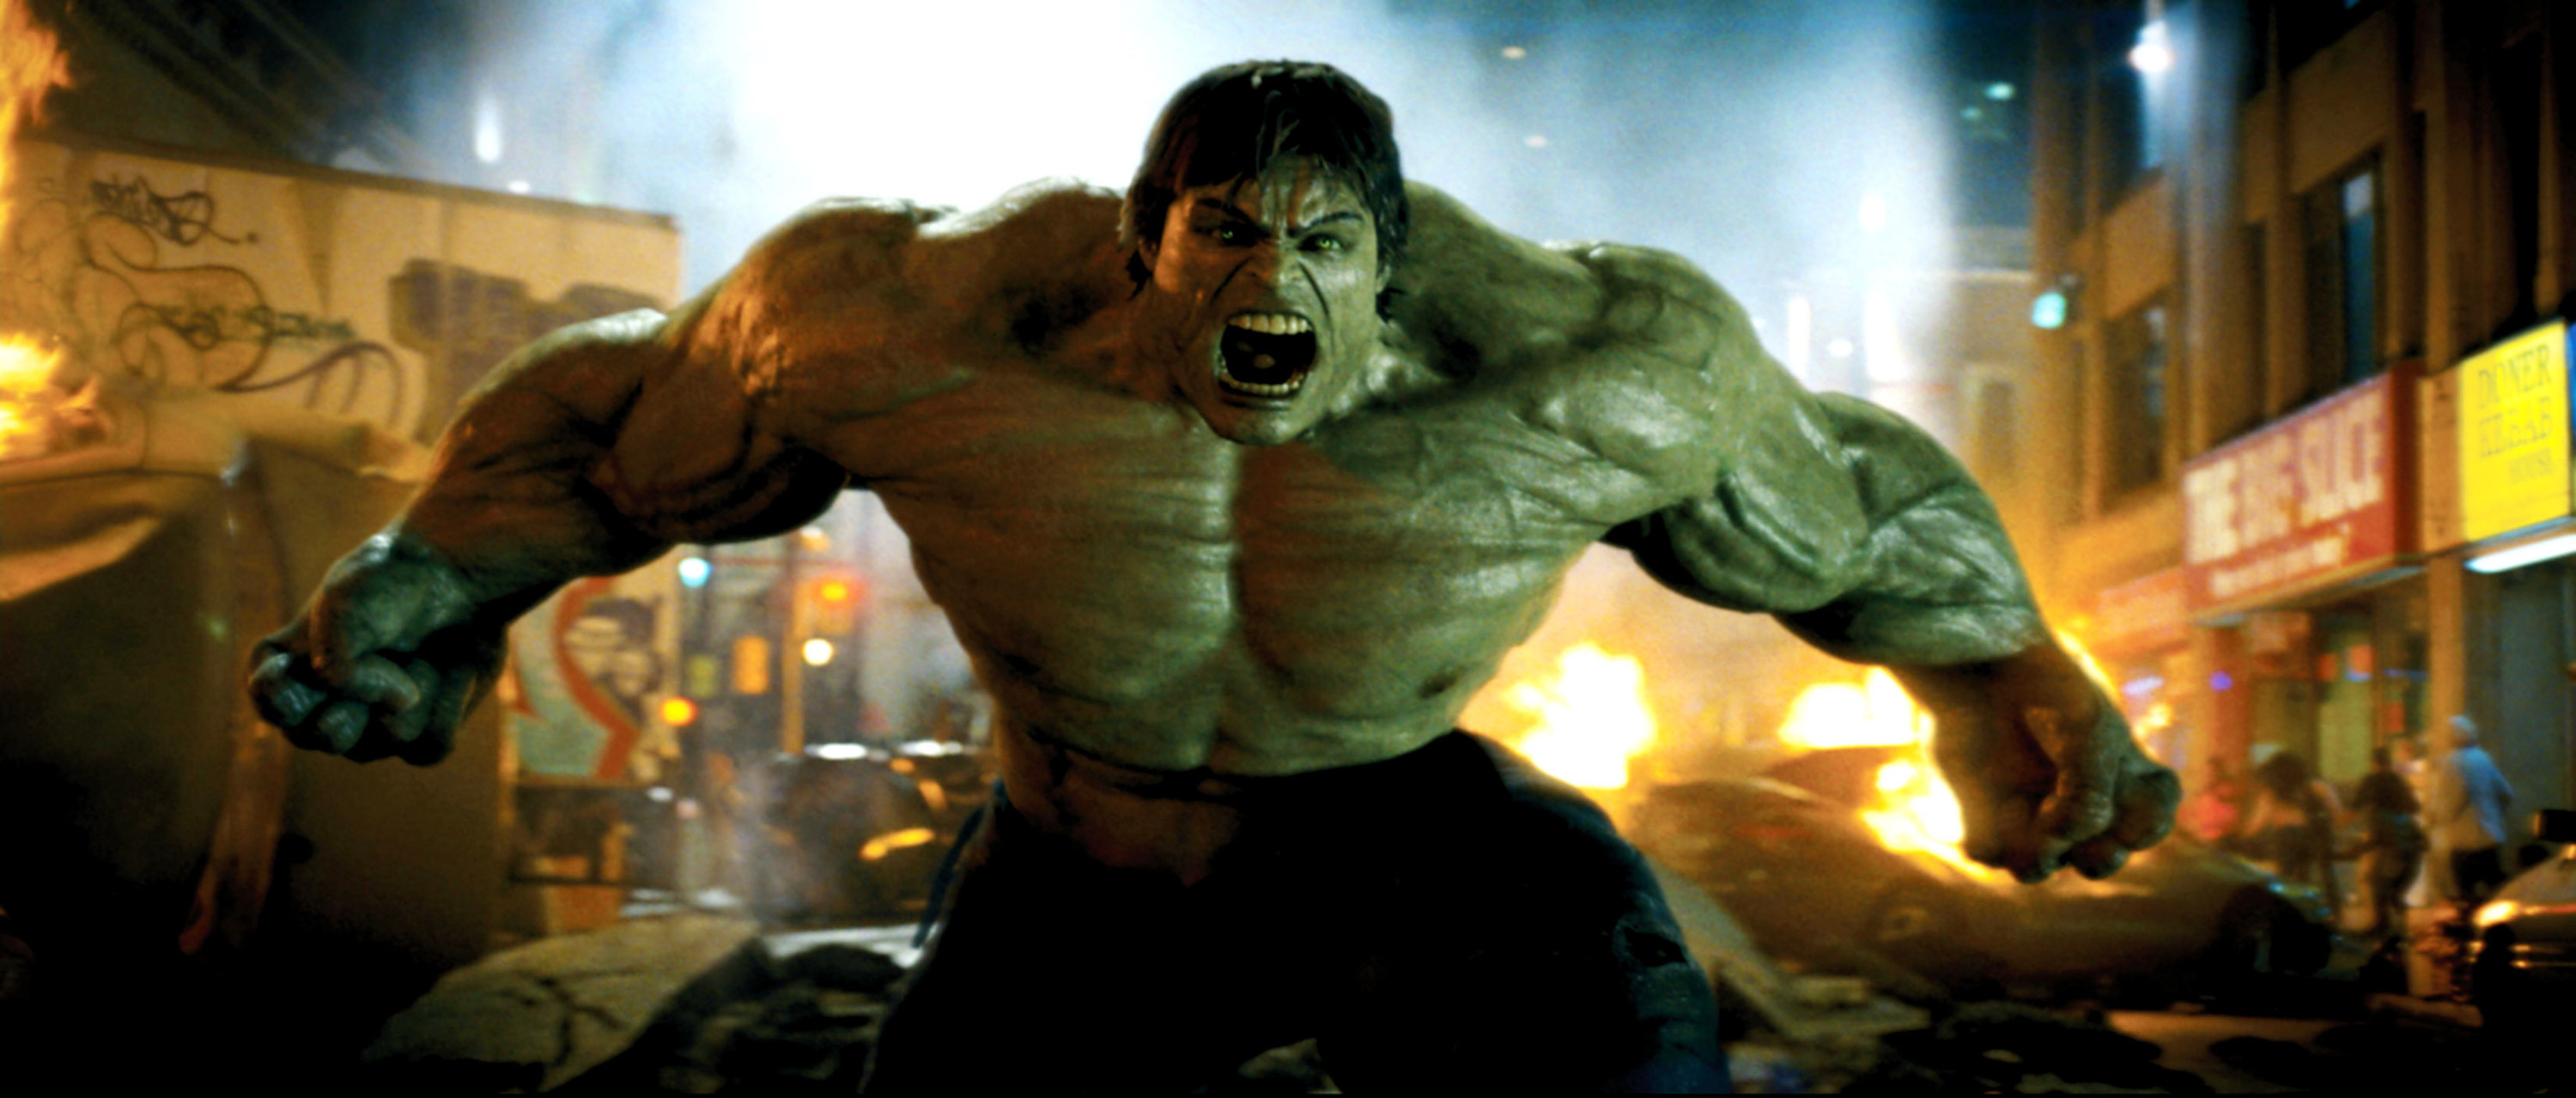 &quot;THE INCREDIBLE HULK&quot;